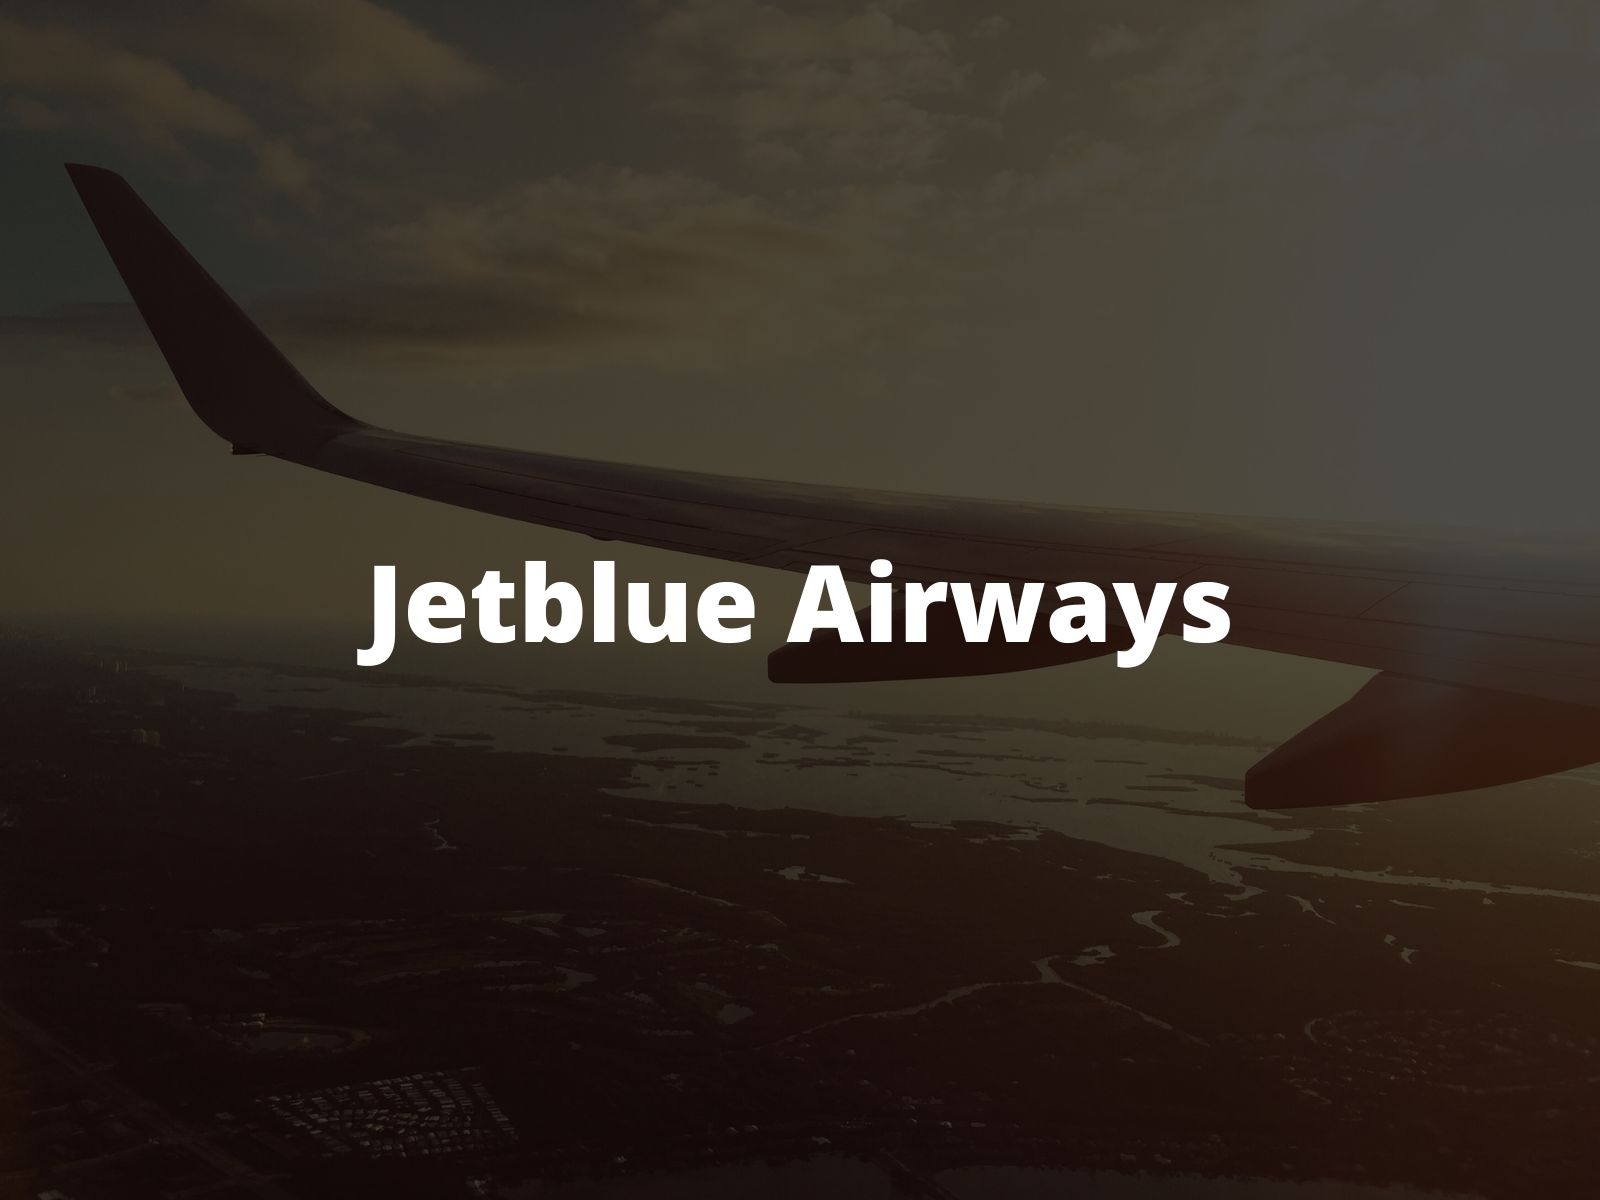 jjke airways travel and tours